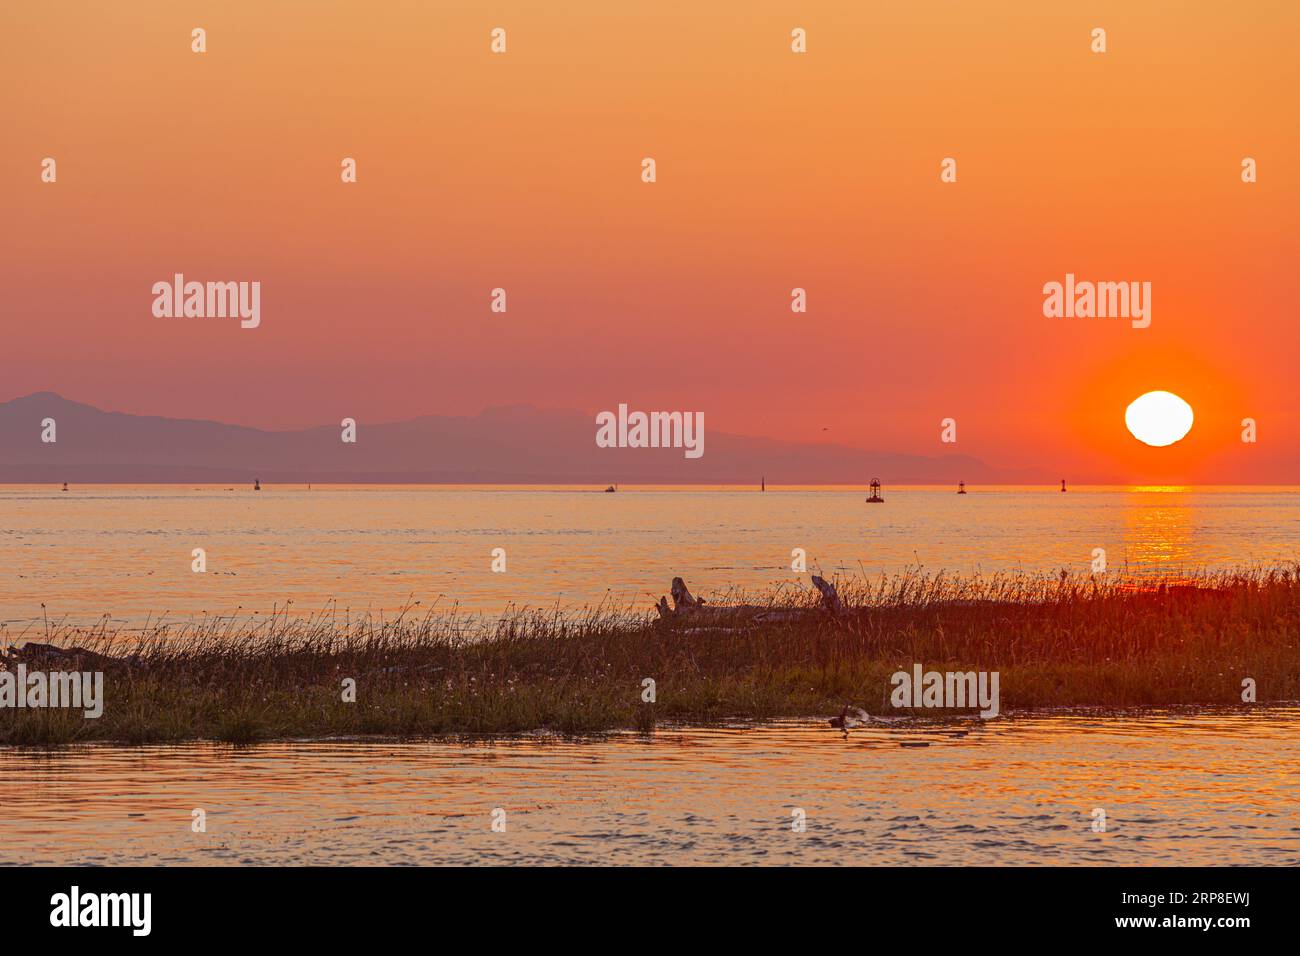 The sun setting over Vancouver Island as seen from Steveston in British Columbia Canada Stock Photo